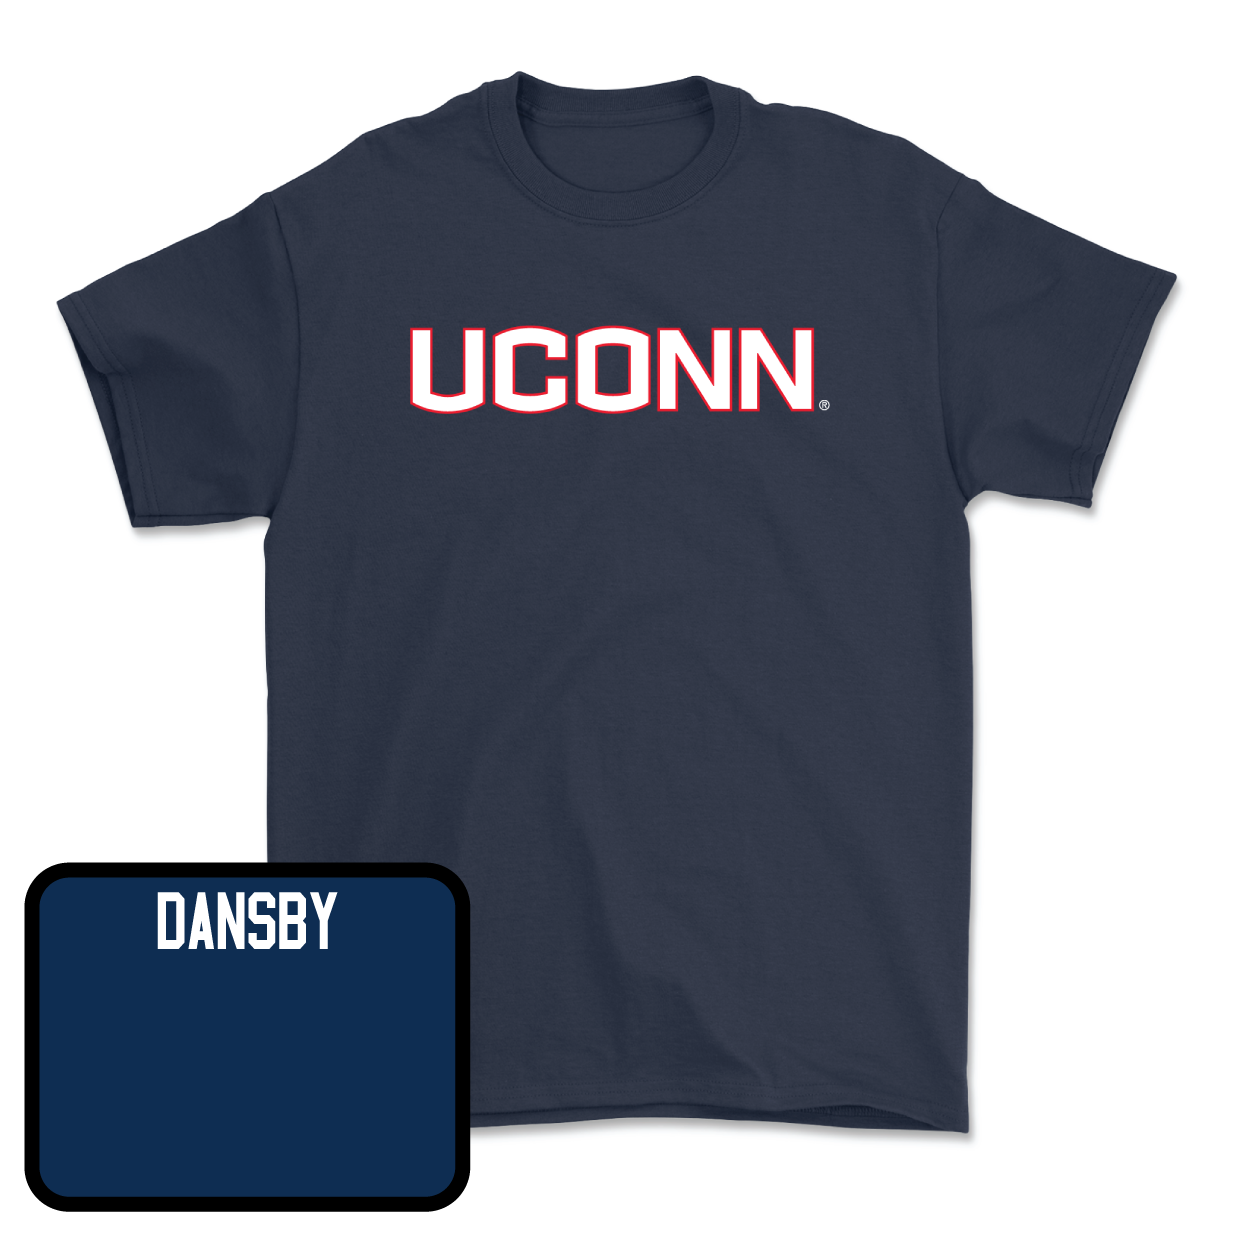 Navy Women's Track & Field UConn Tee 2X-Large / Mia Dansby